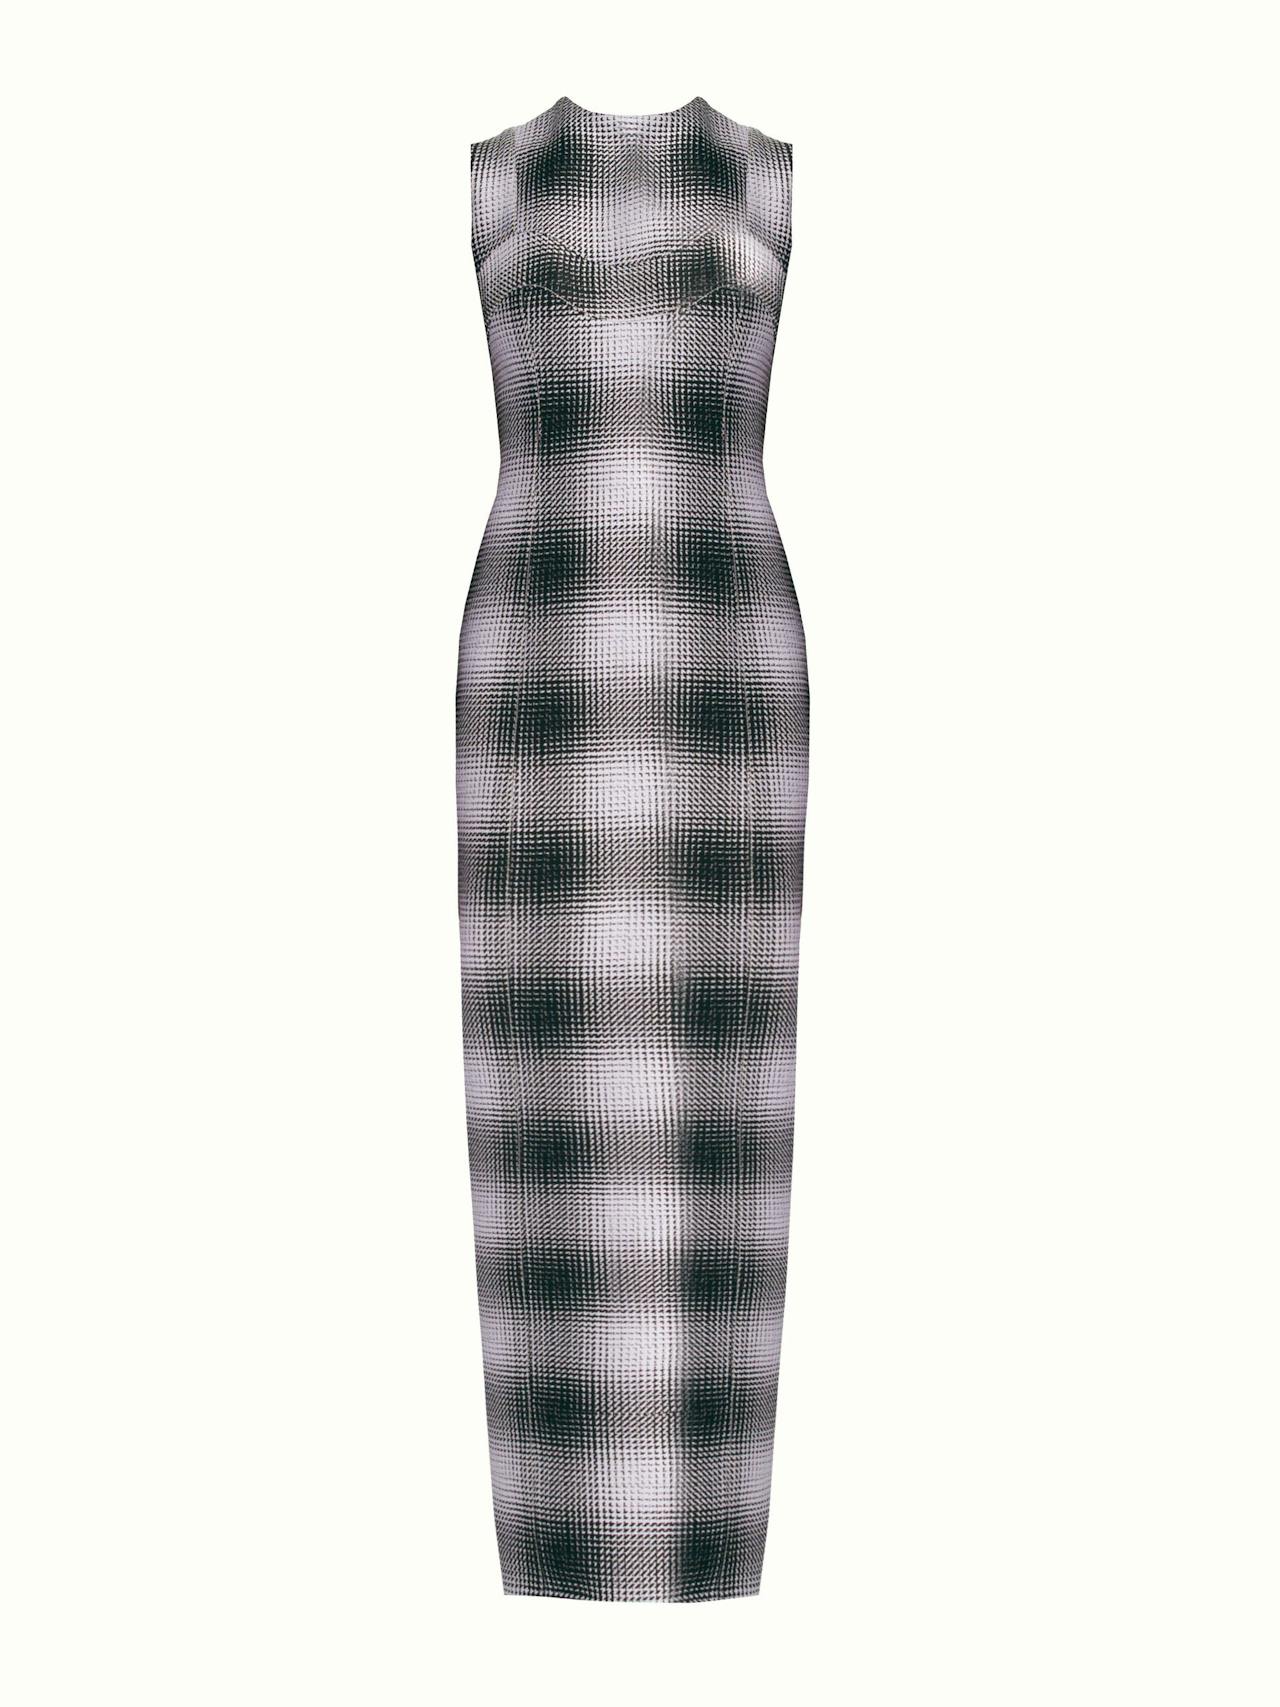 Celene dress in black and white checked cloque